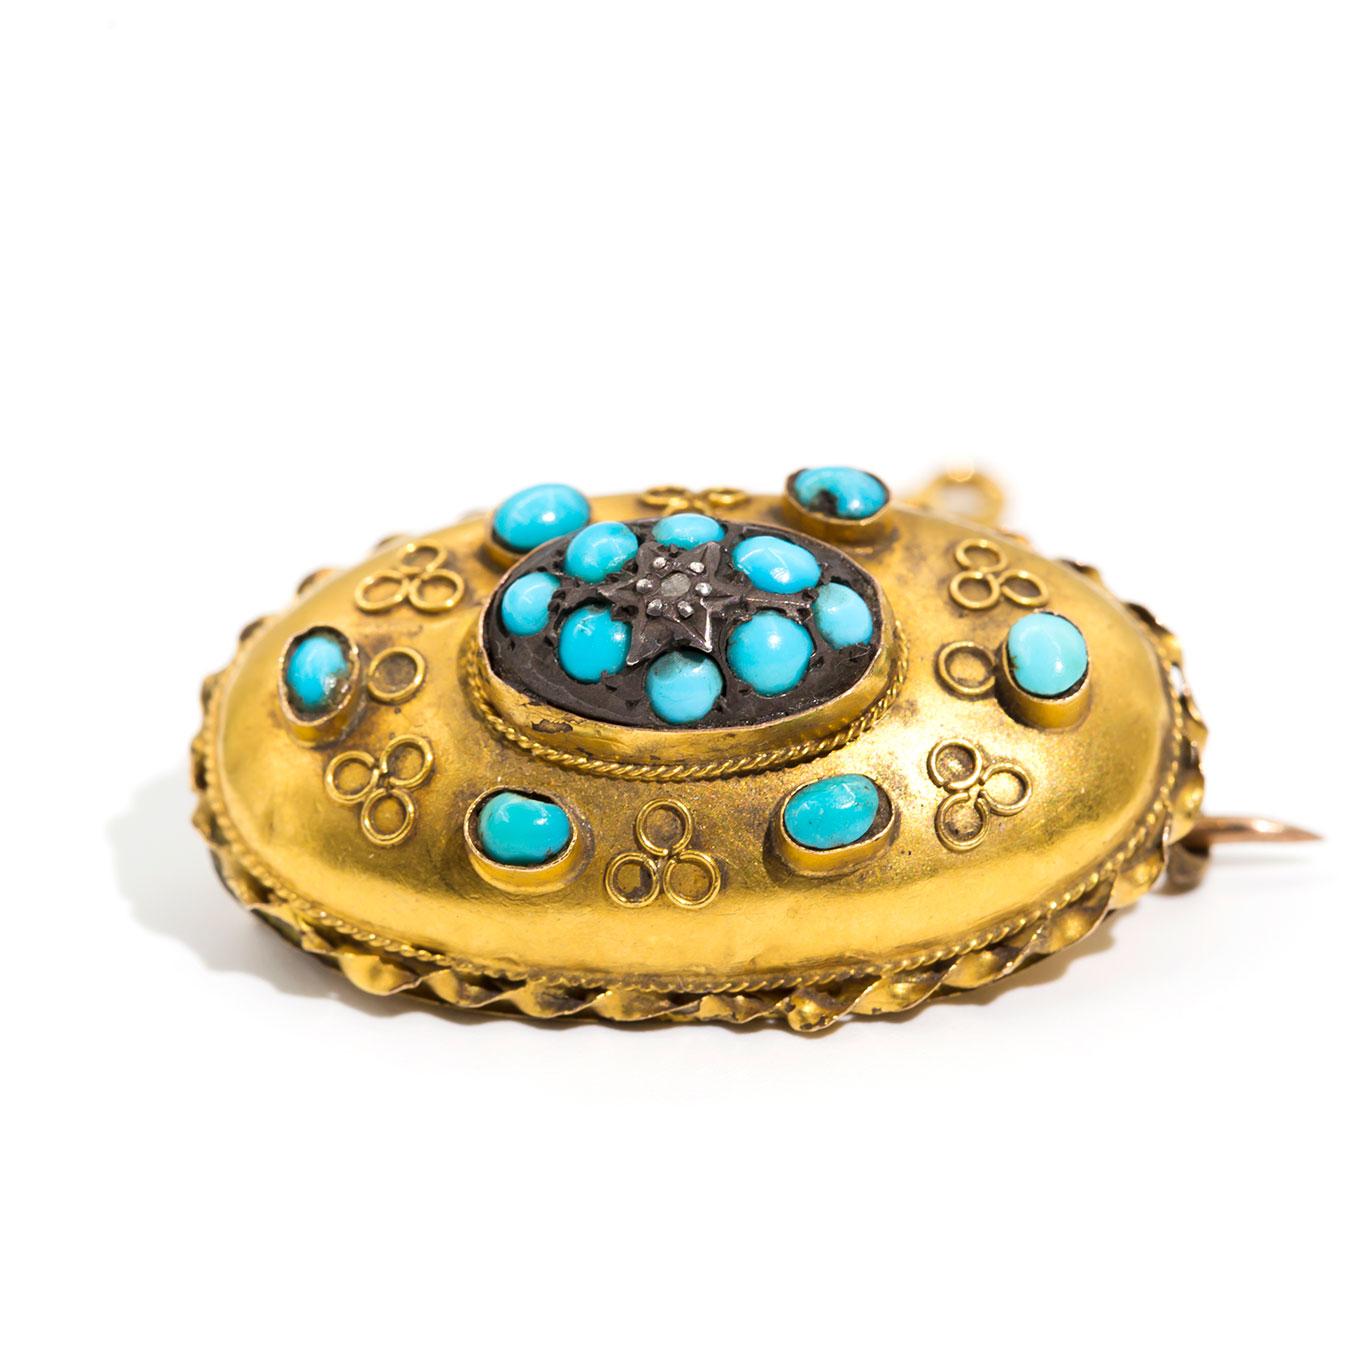 Carefully crafted in 15 carat yellow gold, this antique 19th-century Victorian mourning brooch is a typically beautiful piece from its era, featuring one central diamond and fourteen oval and round Turquoise cabochons delicately set in a high dome